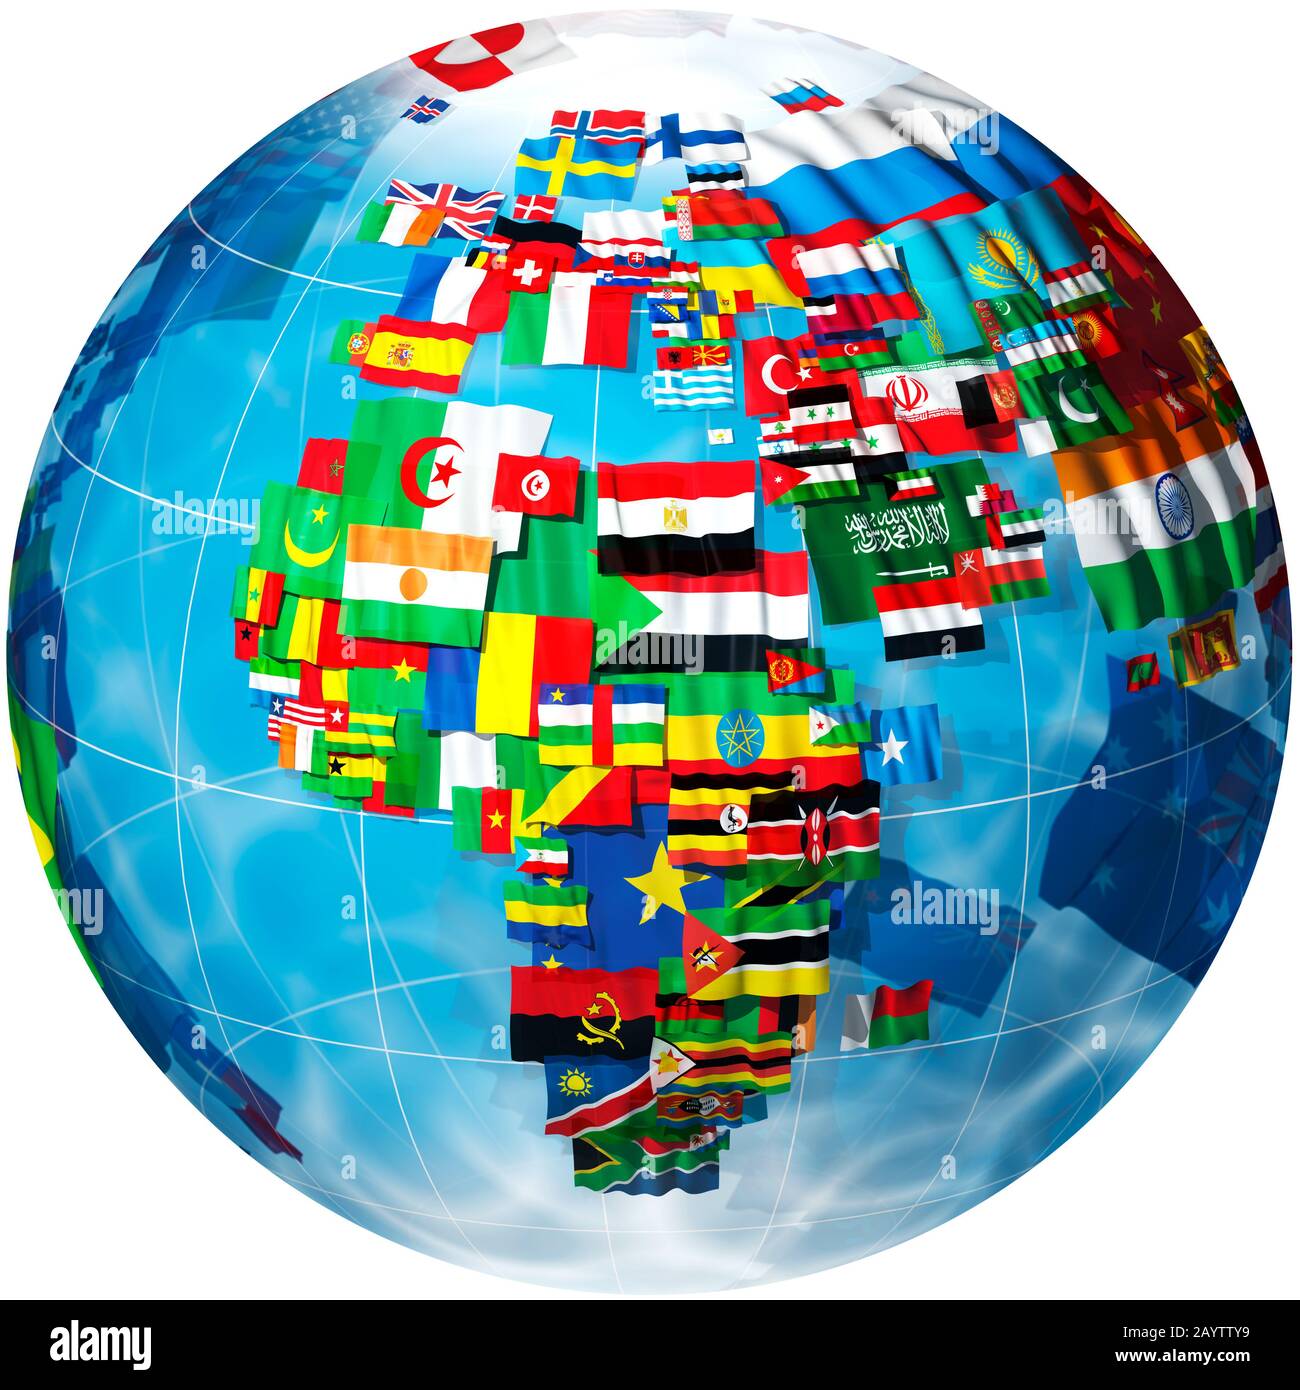 Flags of the world in the shape of a globe. White background. Stock Photo